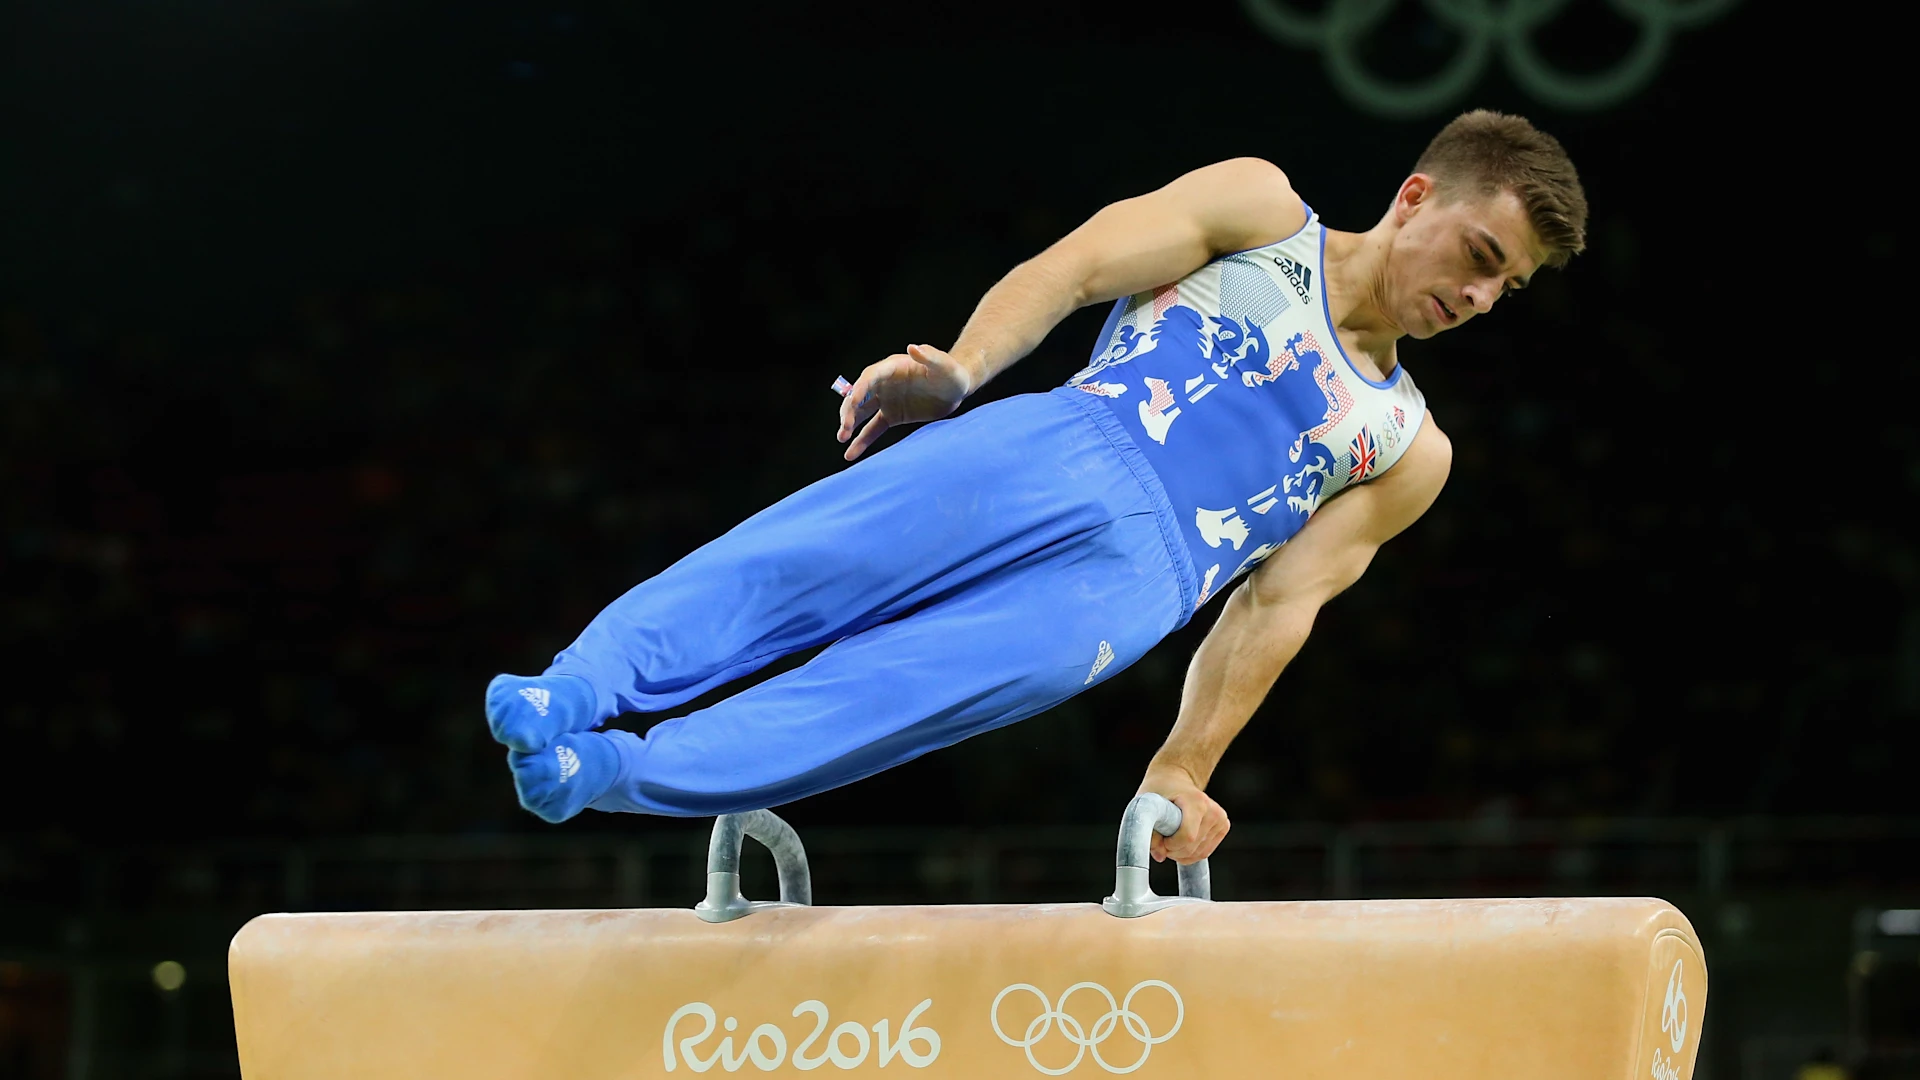 14-facts-about-pommel-horse